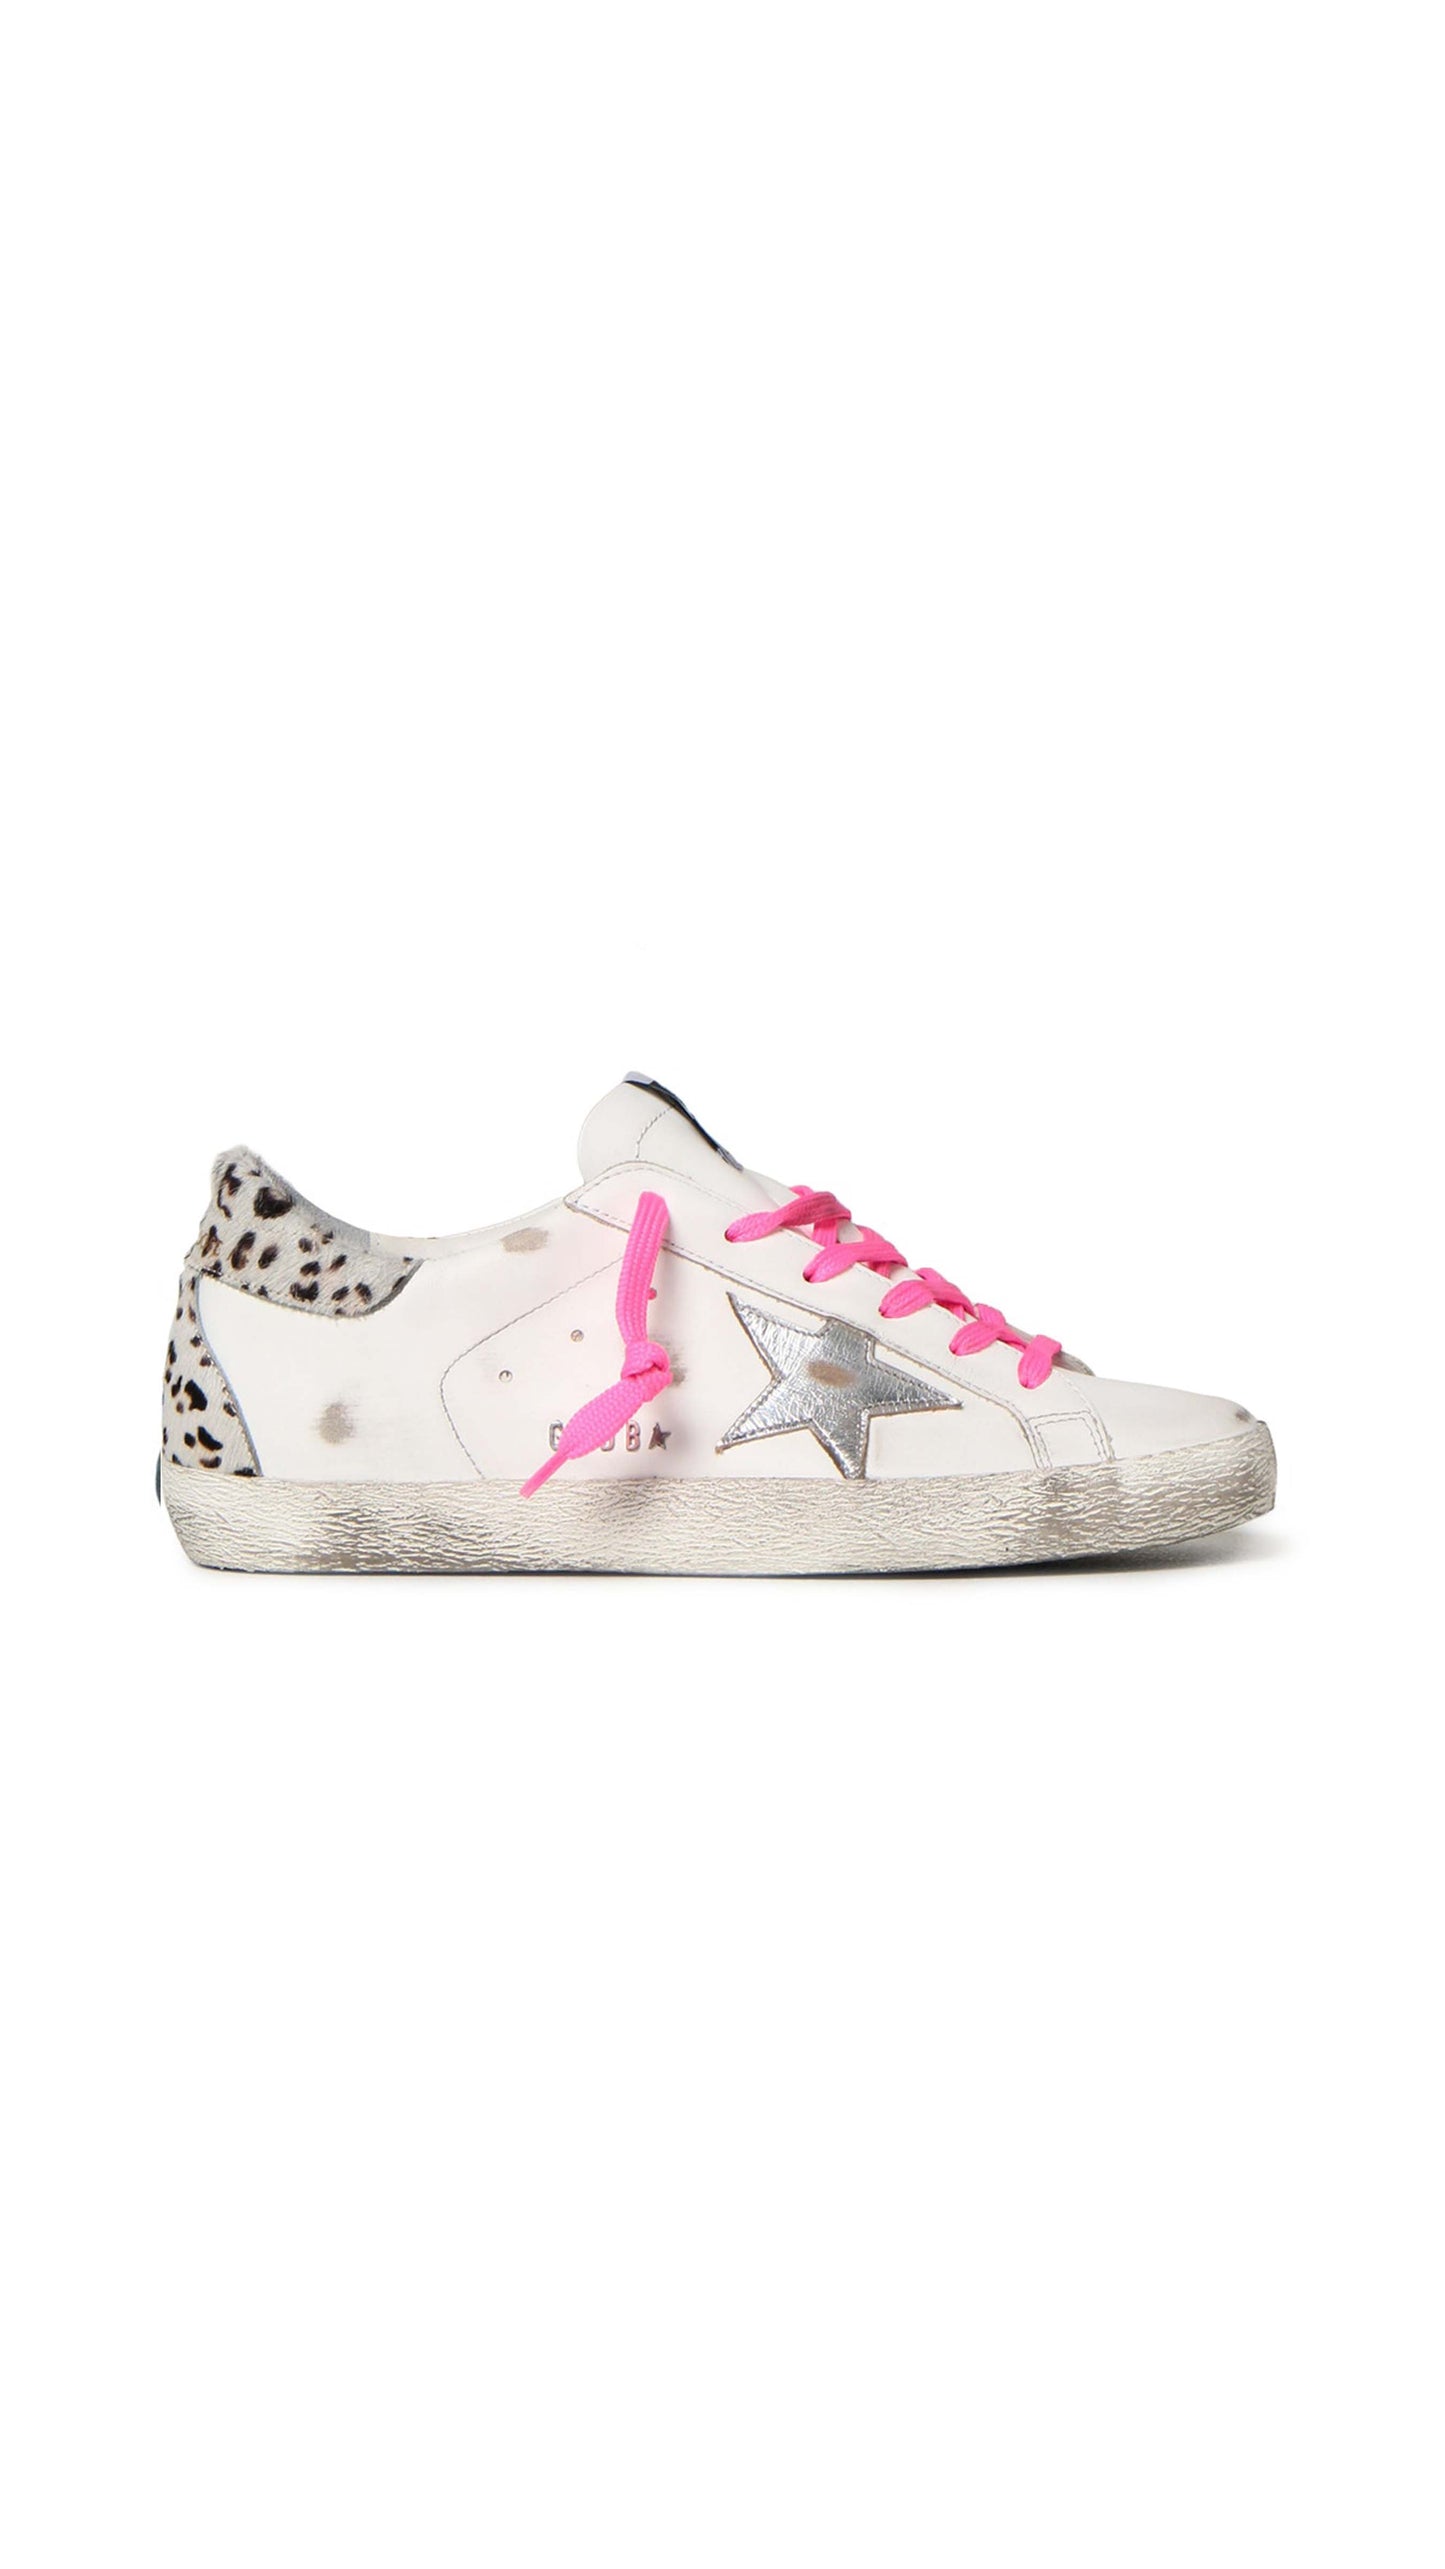 Superstar Sneakers - Leopard / White.